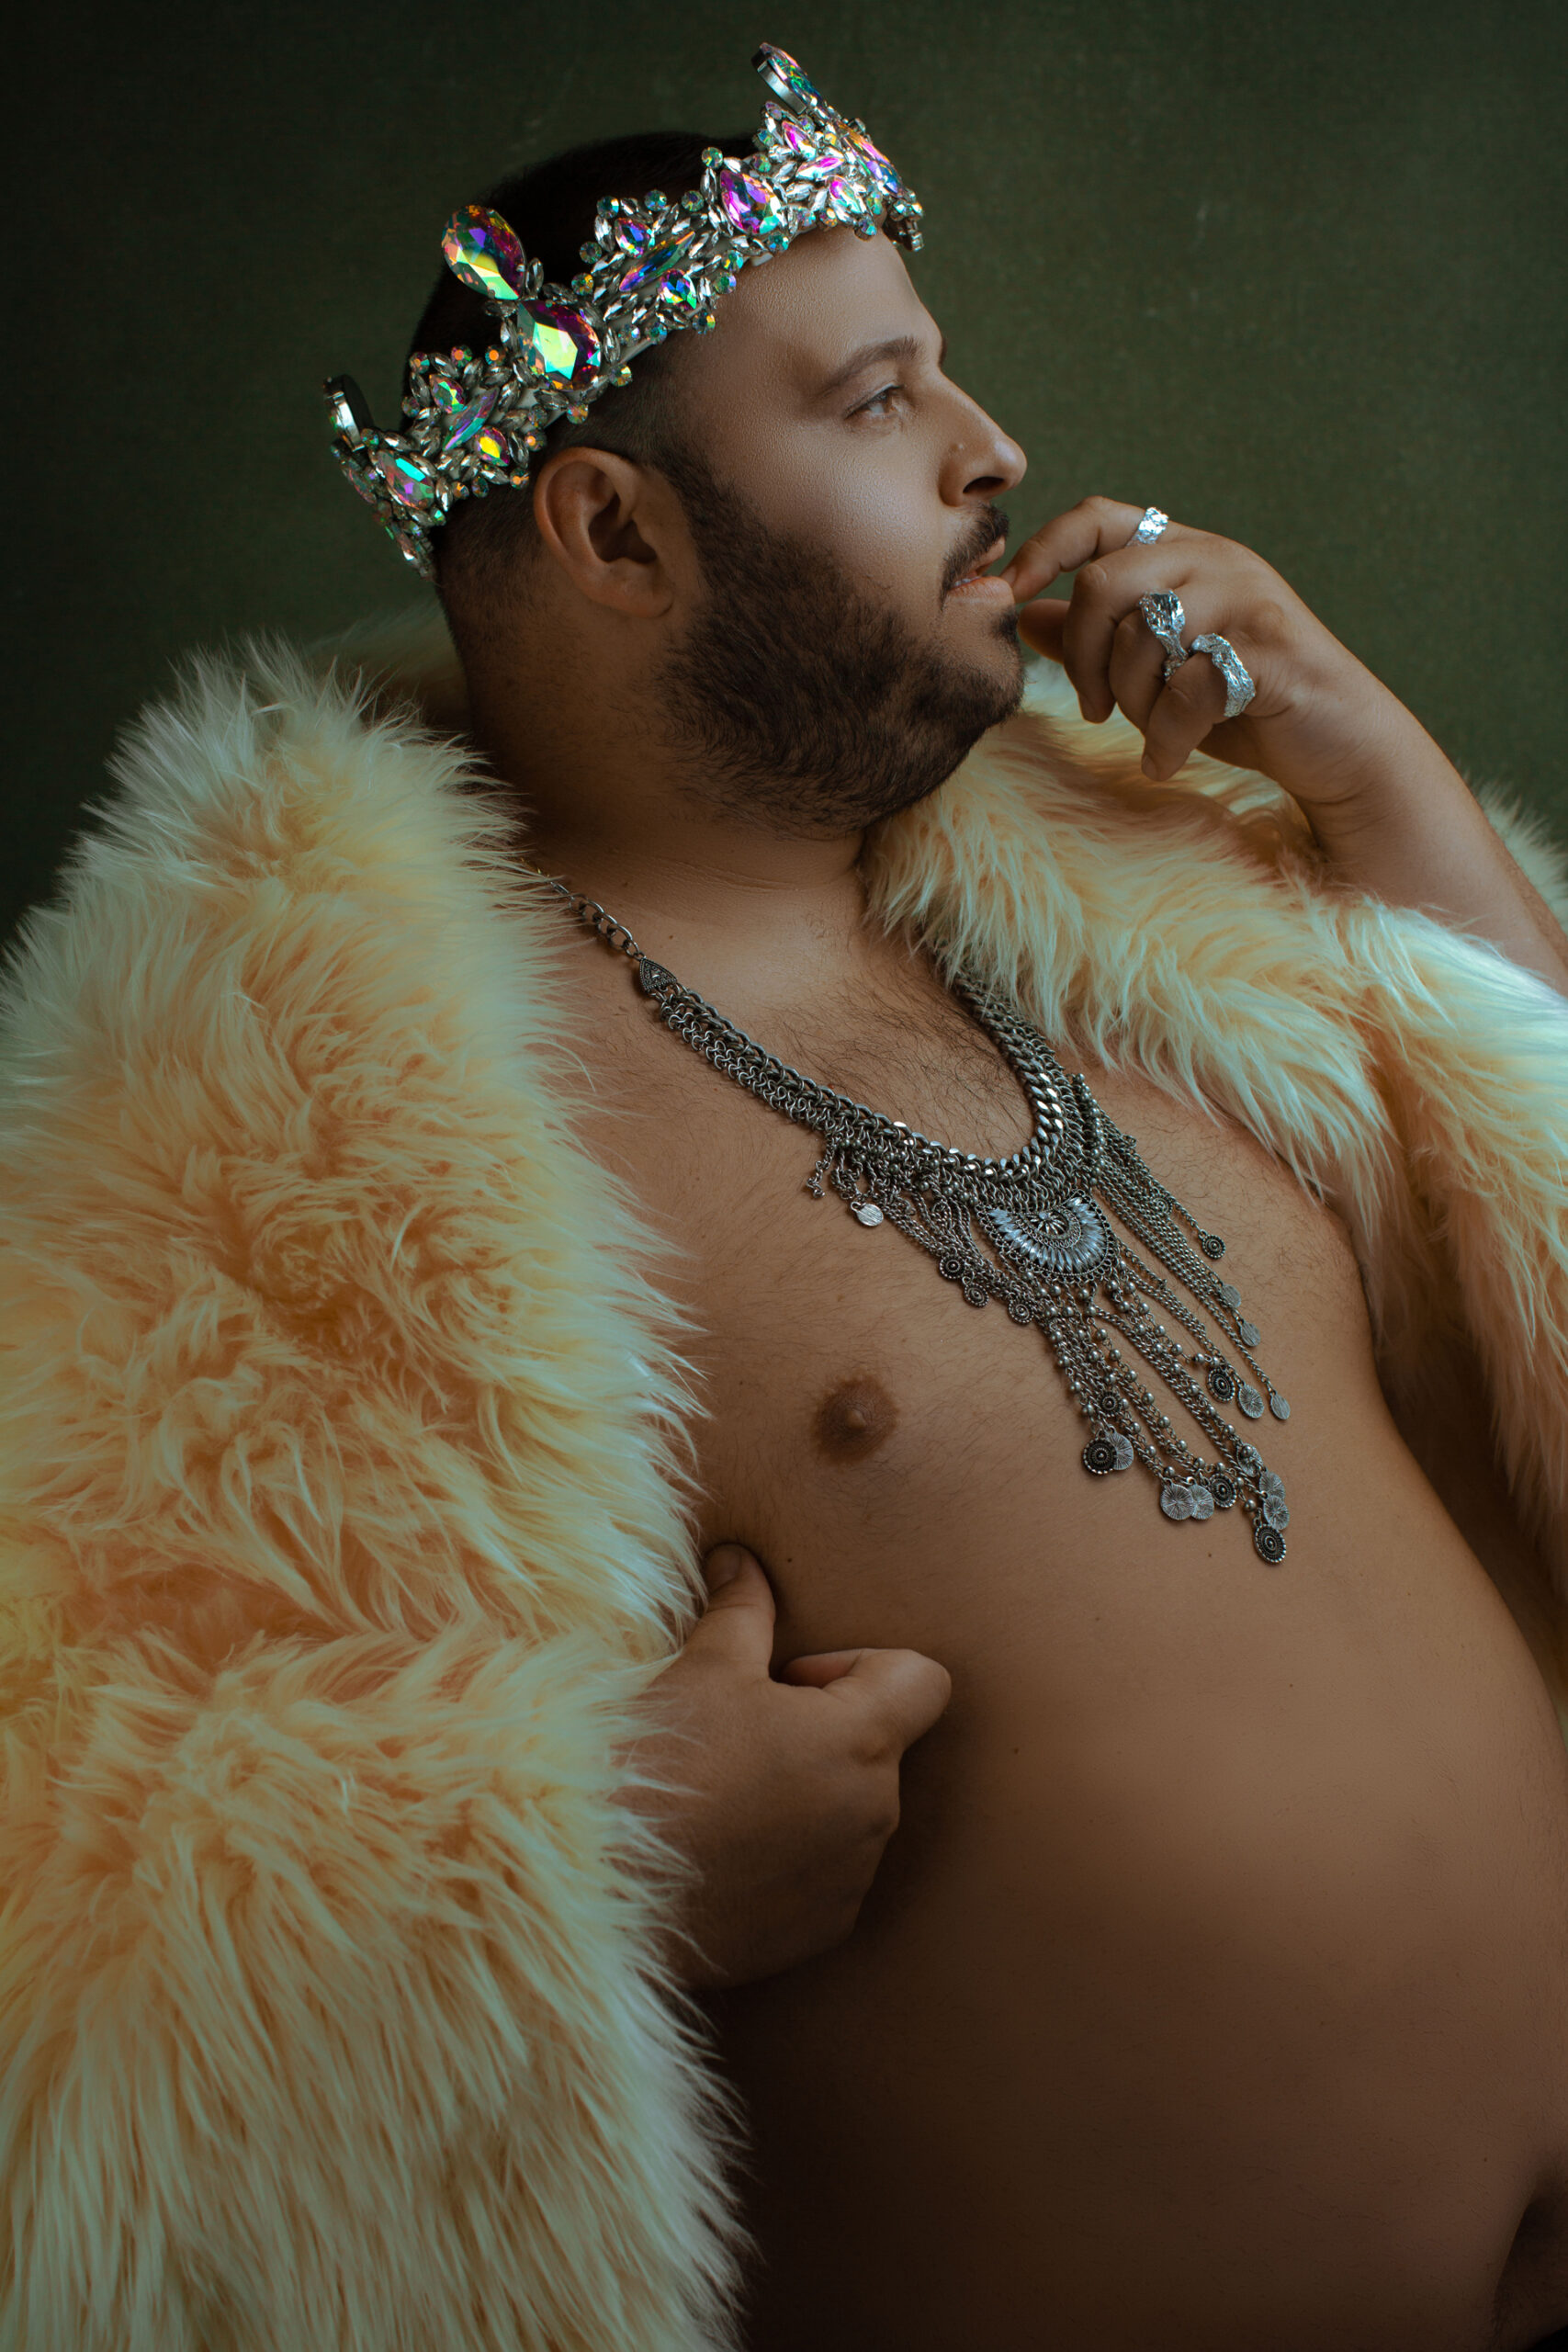 Paul Brickman Creative Photography Daniel Franzese Actor Mean Girls Looking HBO She Doesn't Even Go Here Magazine Cover King